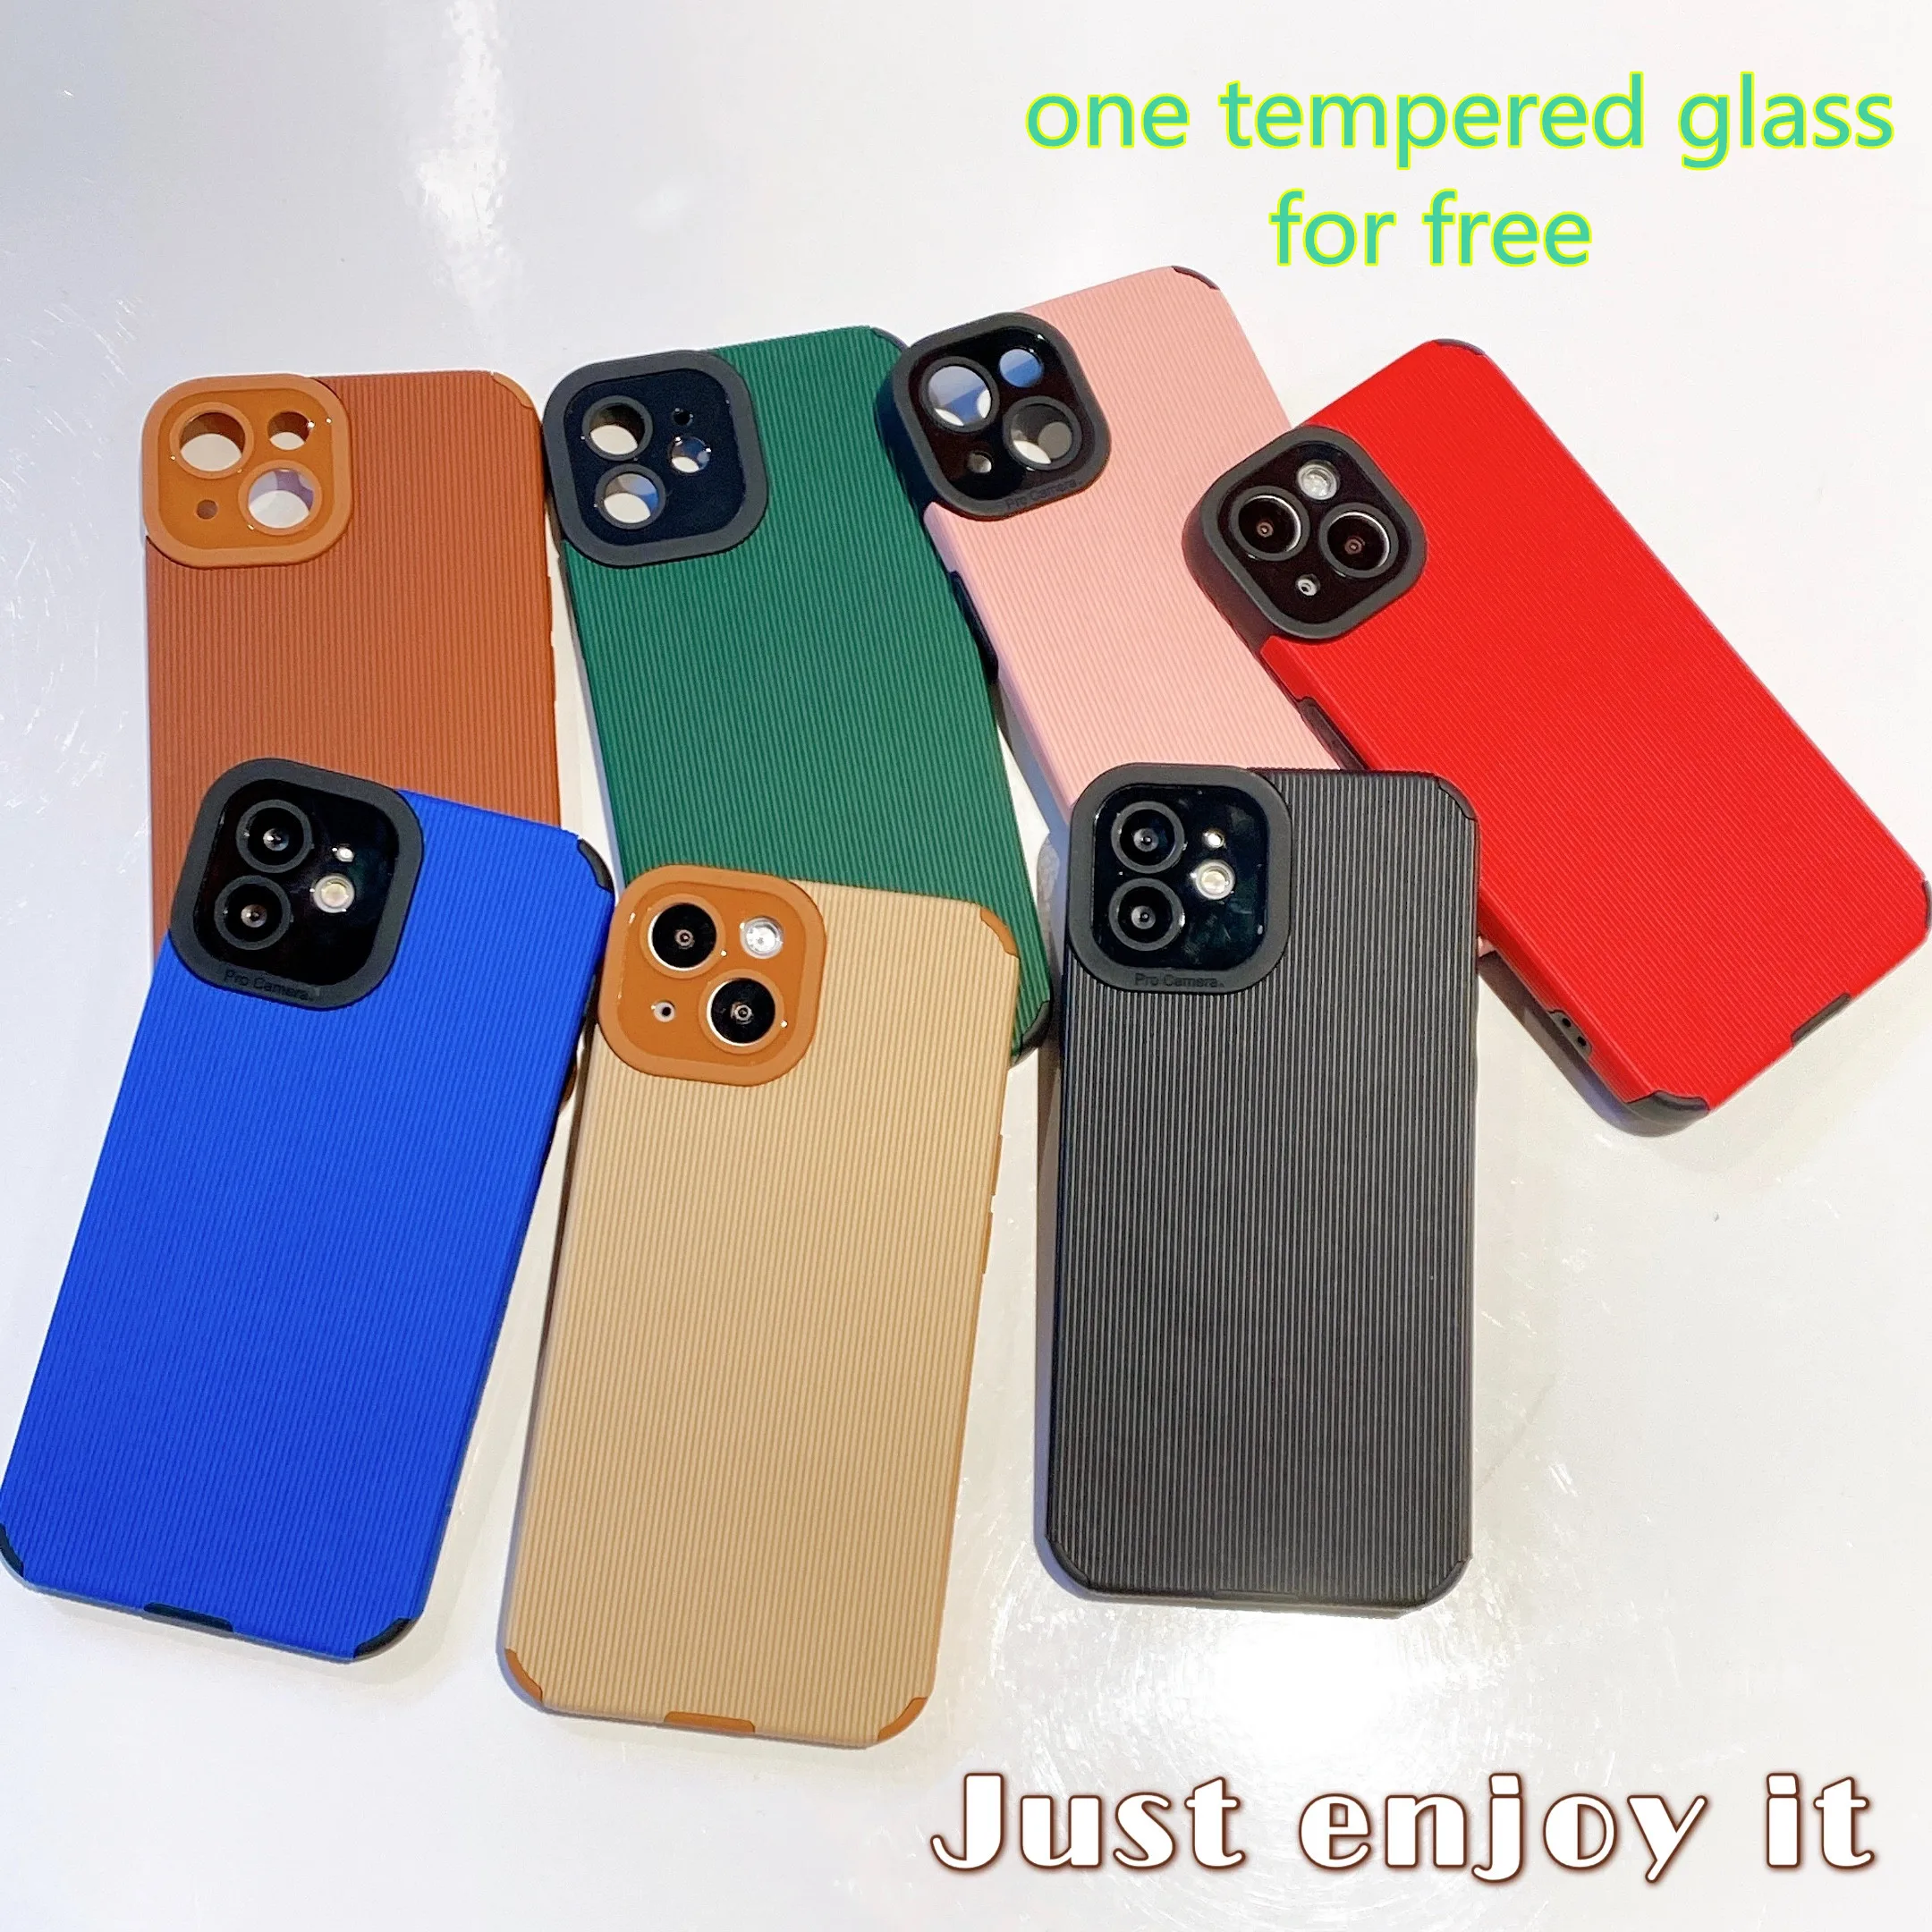 

Leather Case For iPhone 13 Pro Max Soft TPU Case For iPhone 12 Pro чехол на айфон 11 Coque iPhone XS Max Funda iPhone 13 Pro